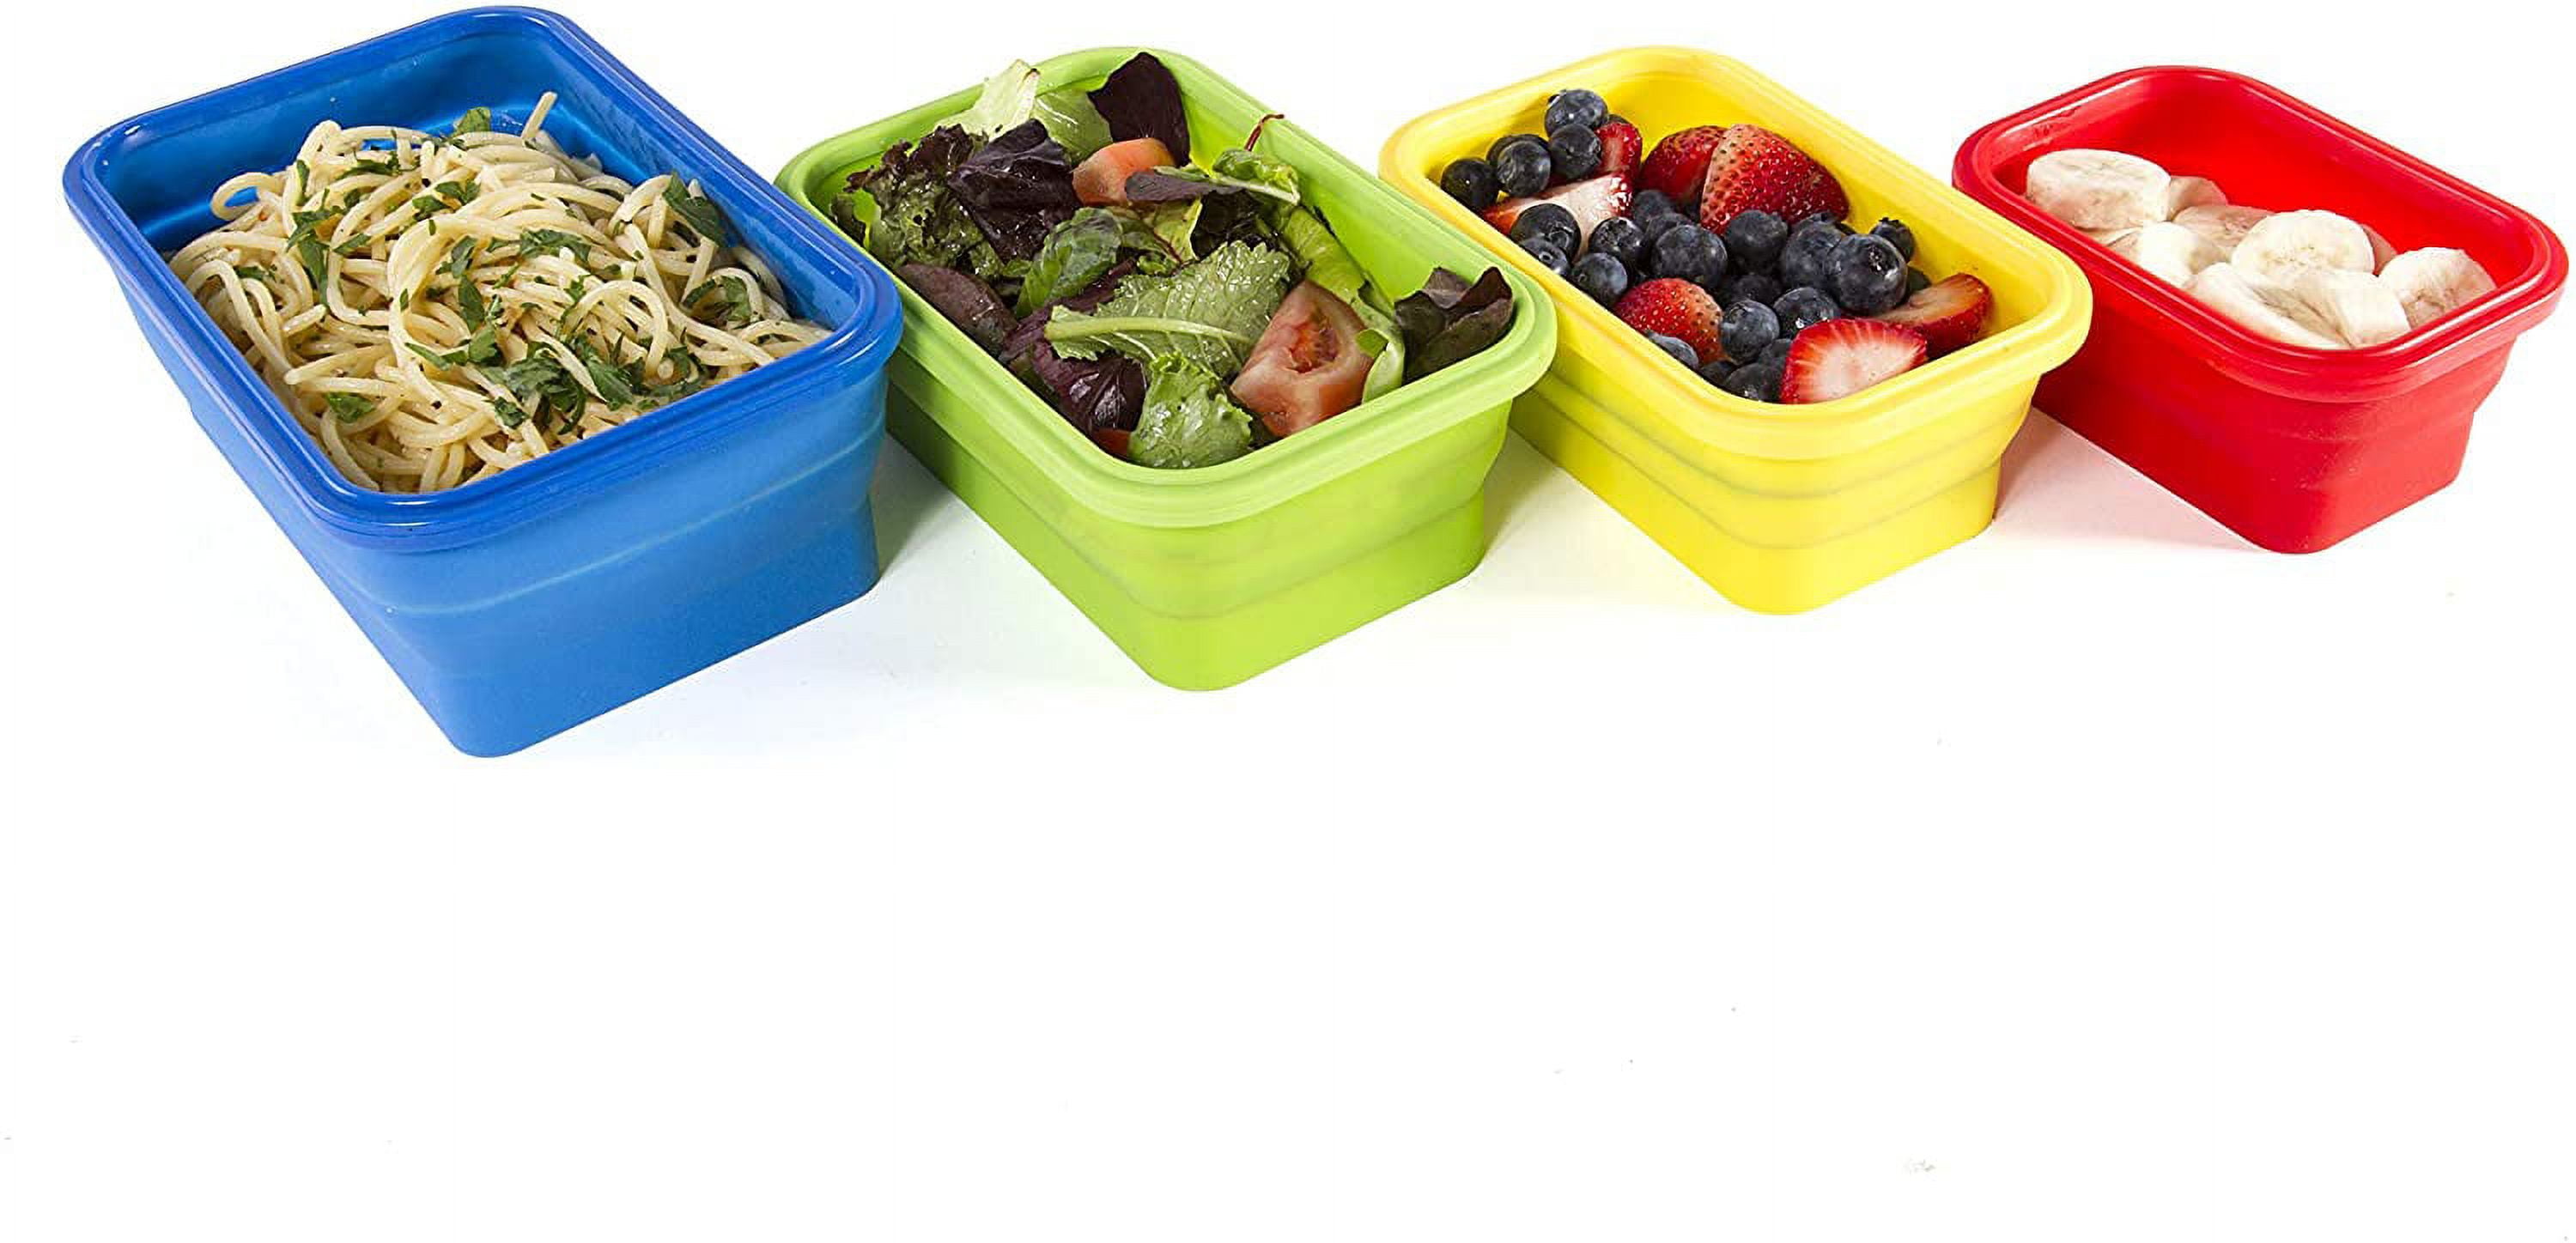 Thin Bins Food Storage Containers - Set of Collapsible Silicone w